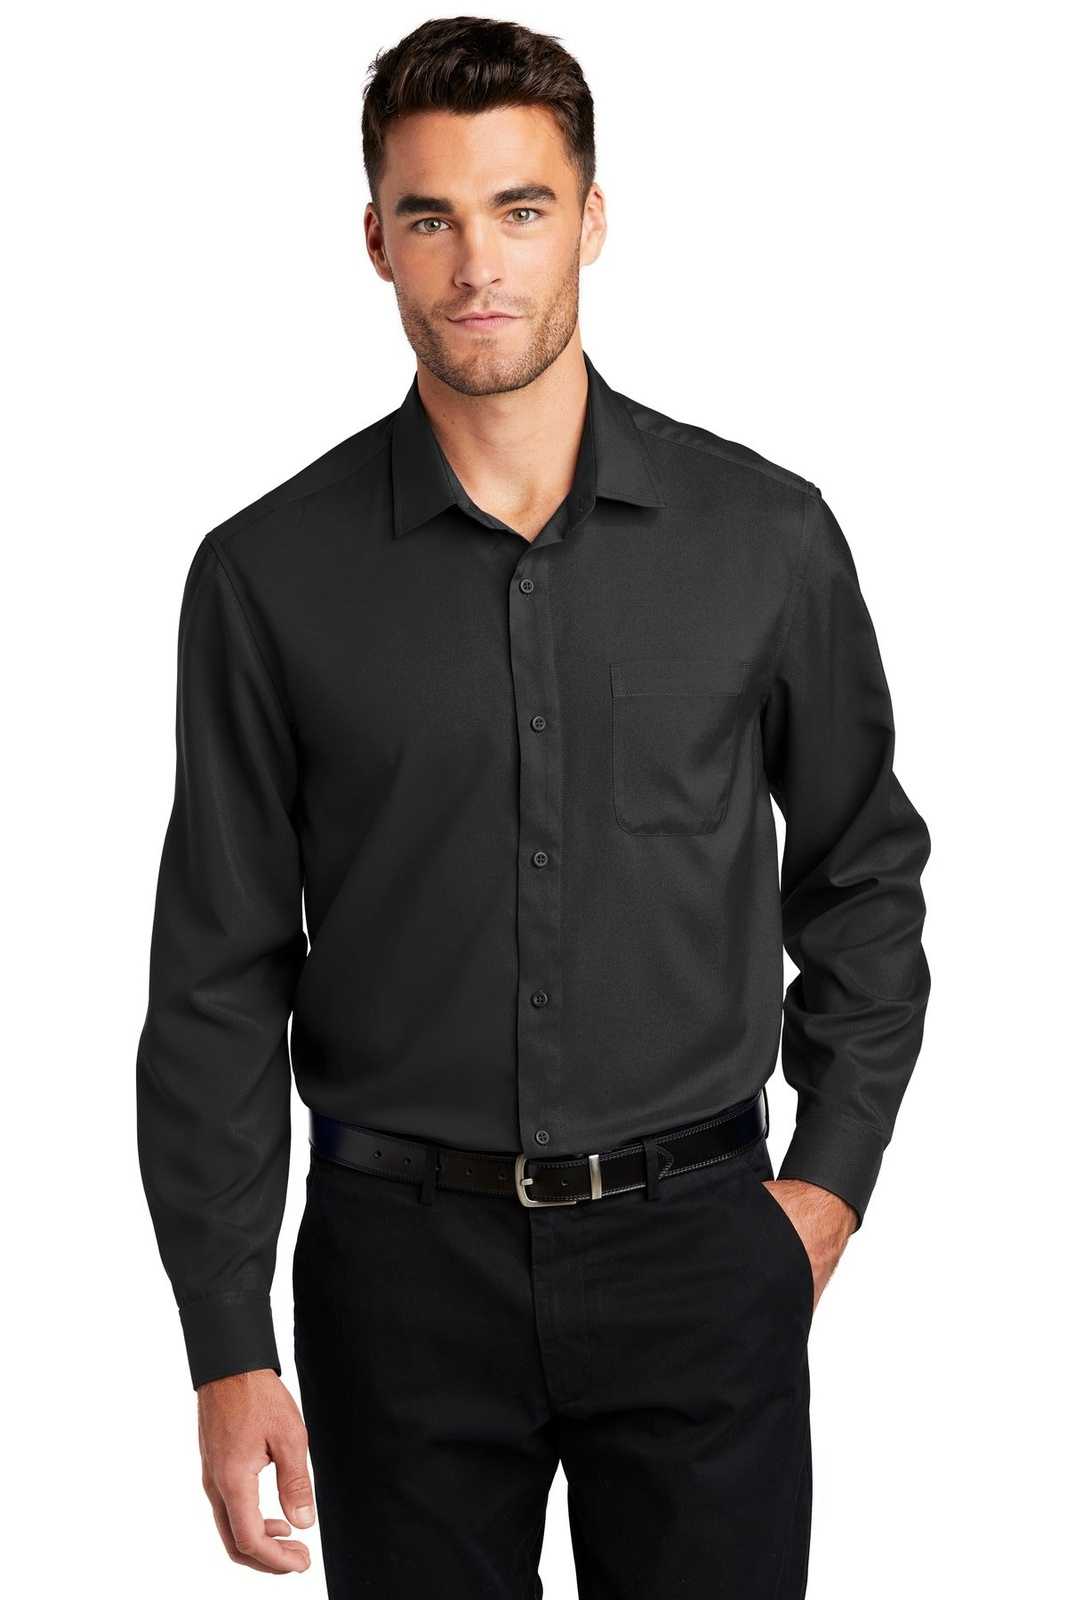 Port Authority W401 Long Sleeve Performance Staff Shirt - Black - HIT a Double - 1